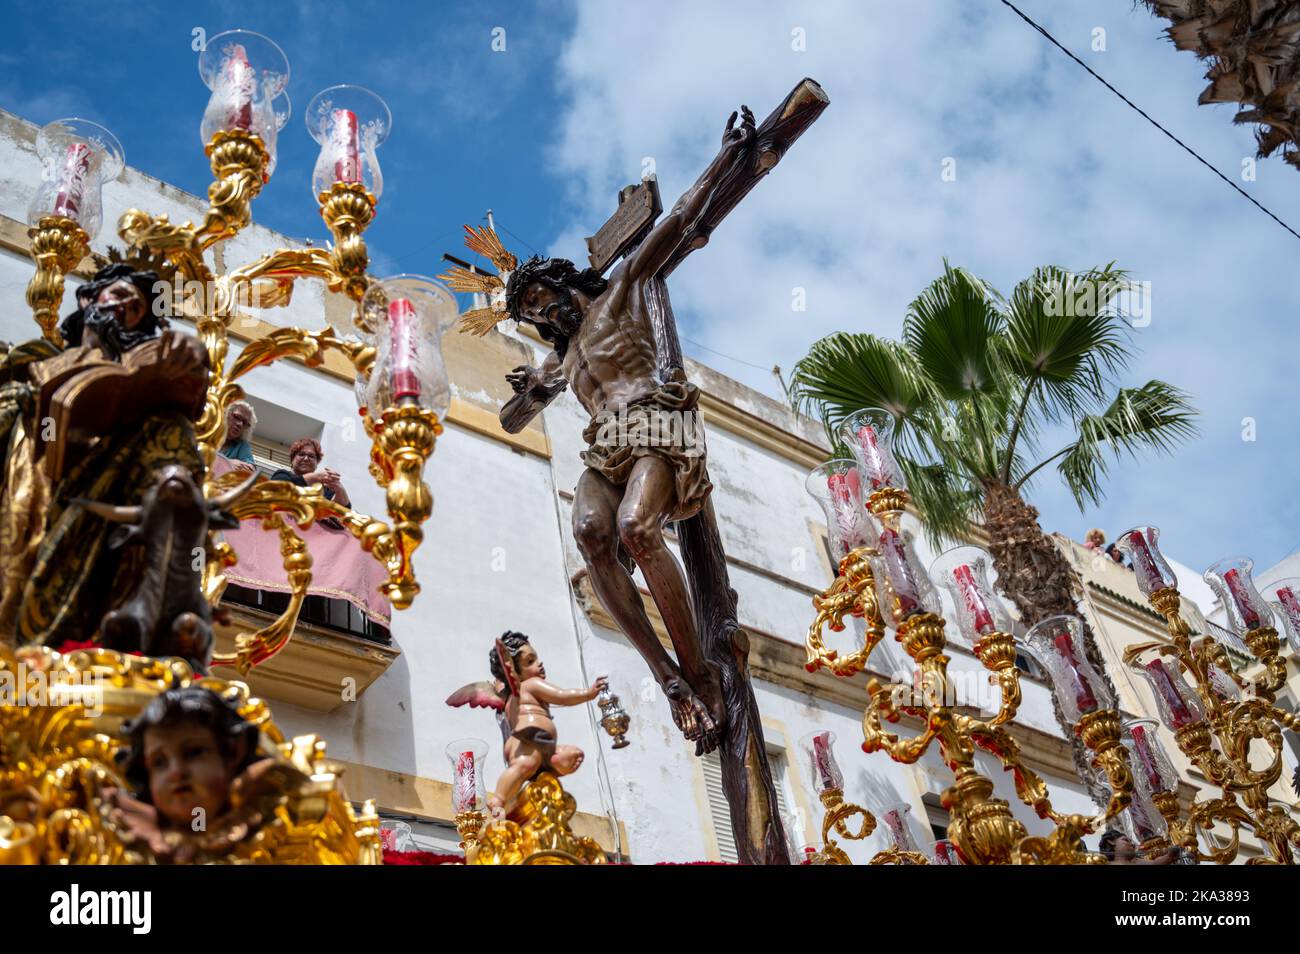 A throne with a statue of Jesus in an Easter Parade during Holy week or semana santa in Cadiz, Spain Stock Photo